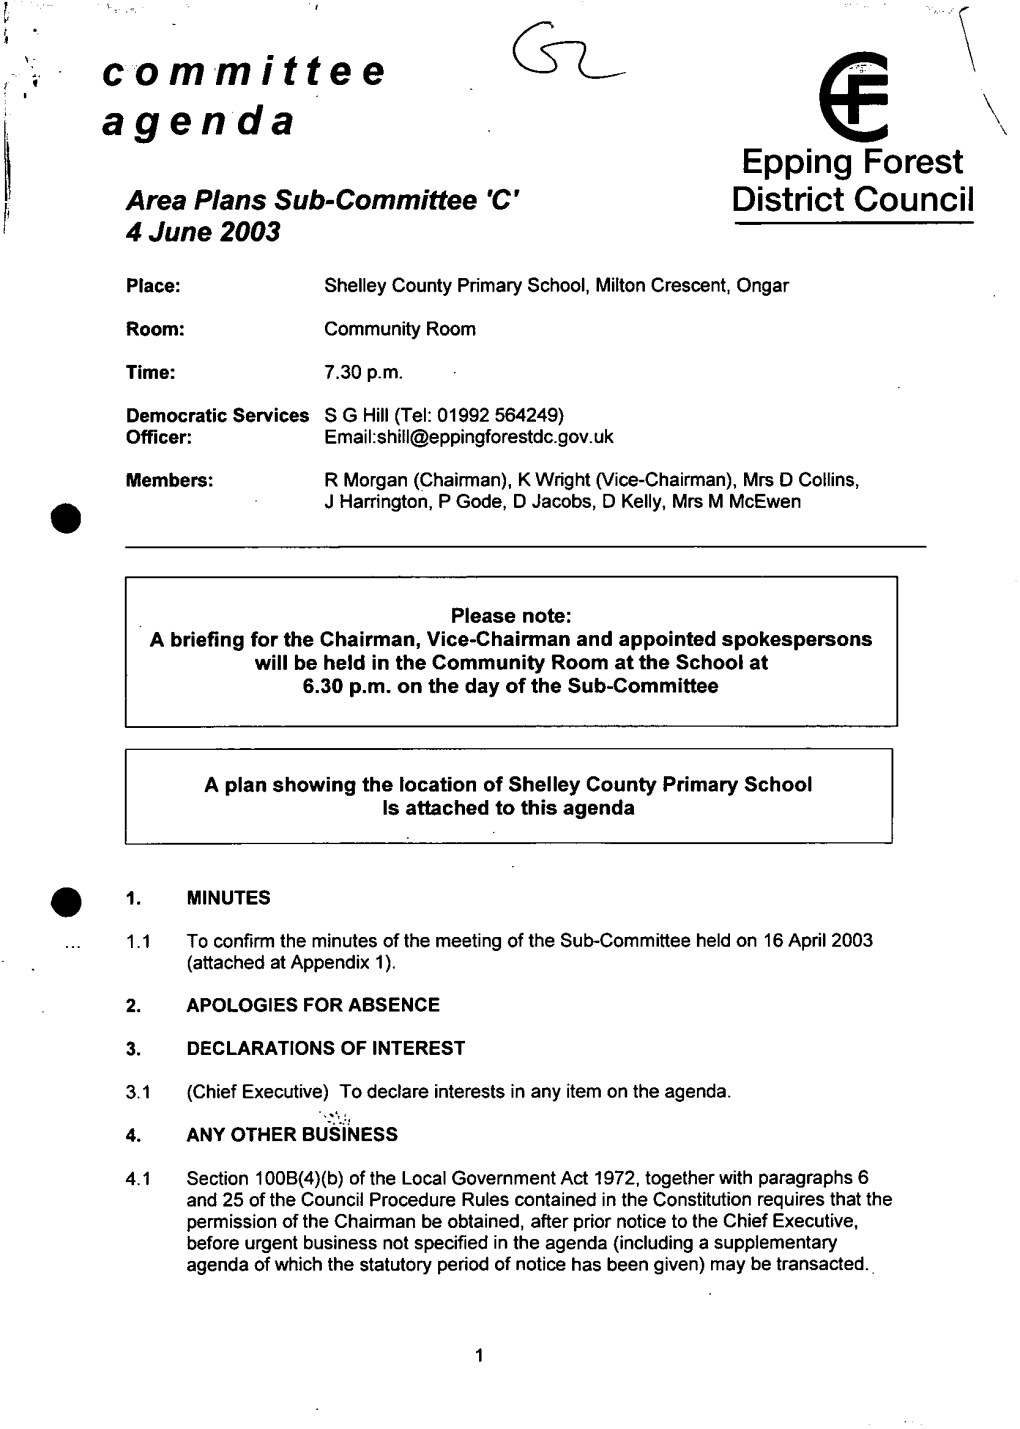 Committee Agenda Epping Forest Area Plans Sub-Committee 'C' District Council 4 June 2003